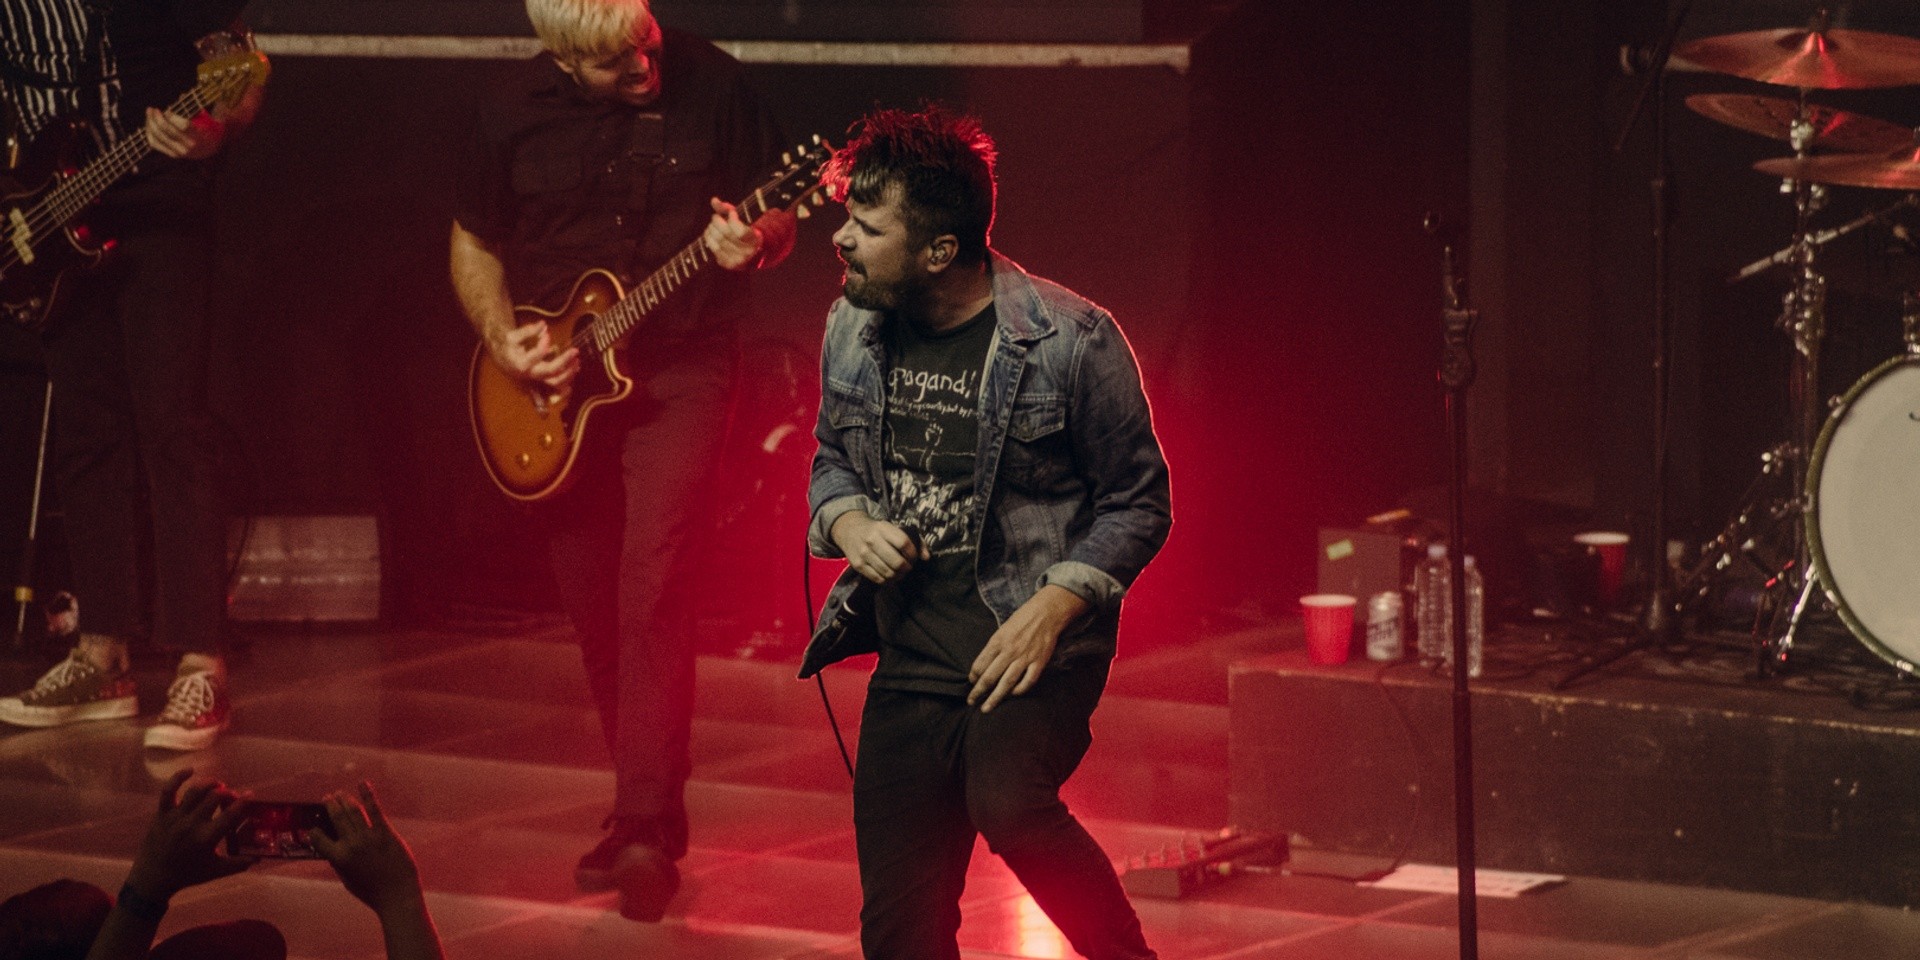 Manila proves their love for Silverstein is 'infinite' at 20th anniversary concert – photo gallery